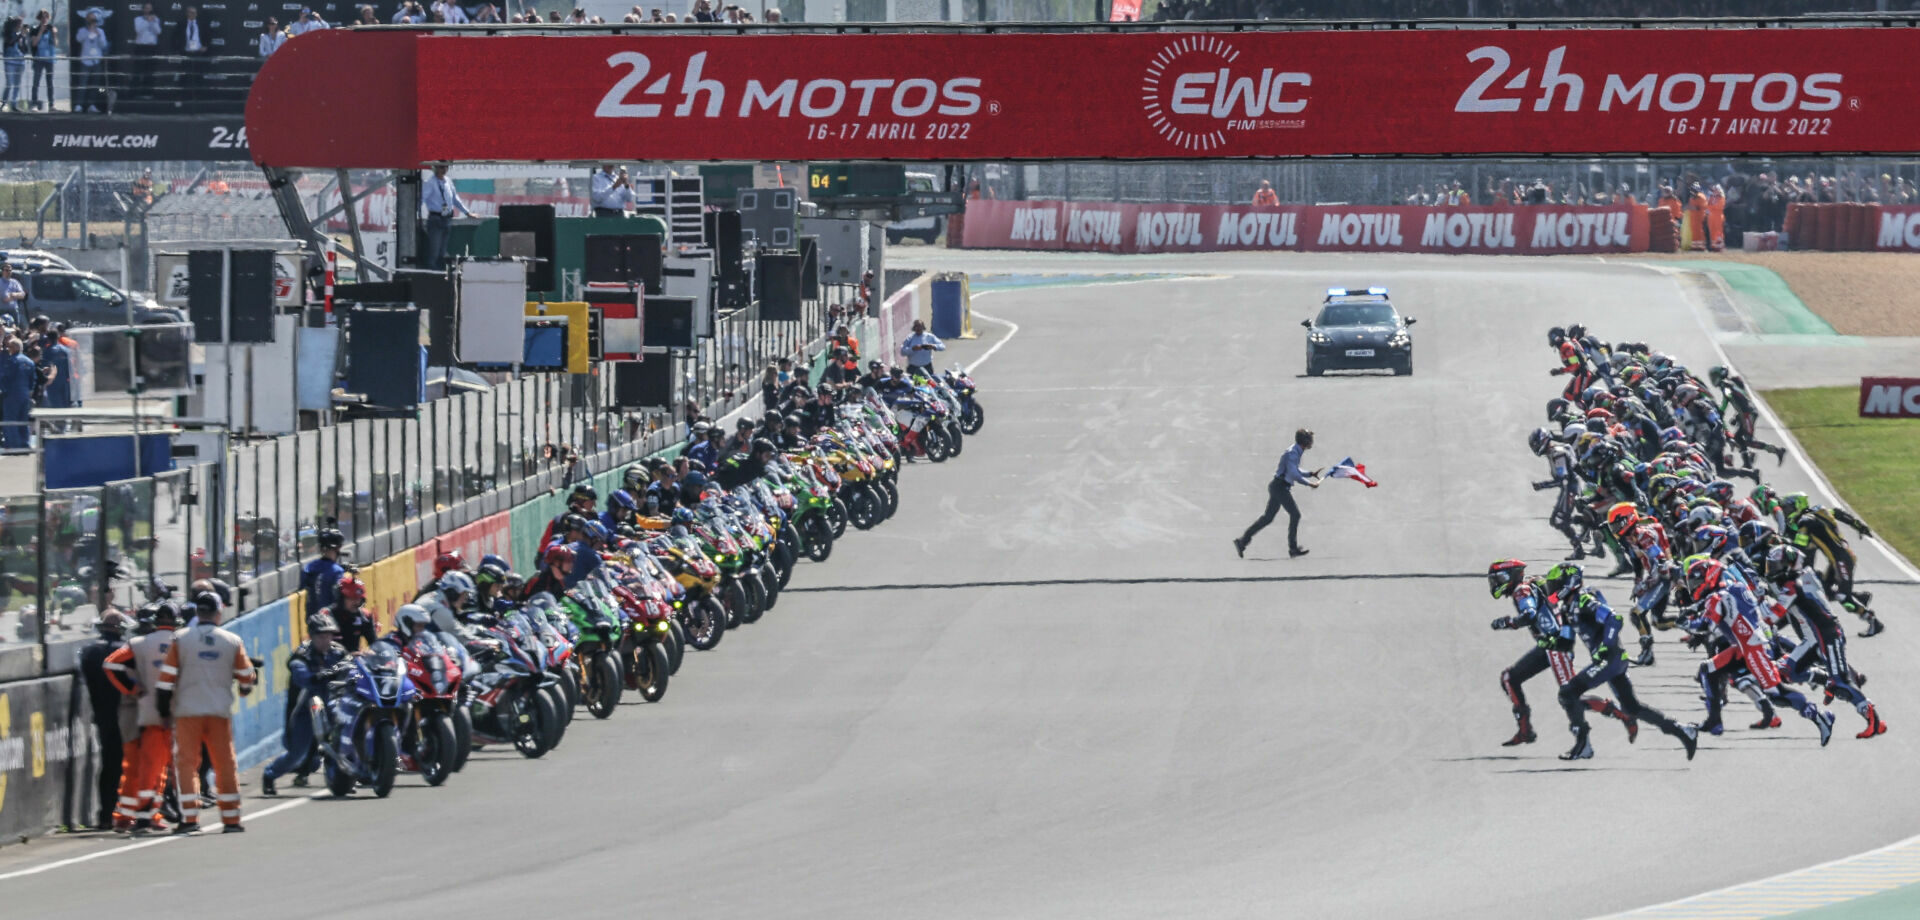 The start of the 24 Hours of Le Mans in 2022. Photo courtesy FIM EWC.